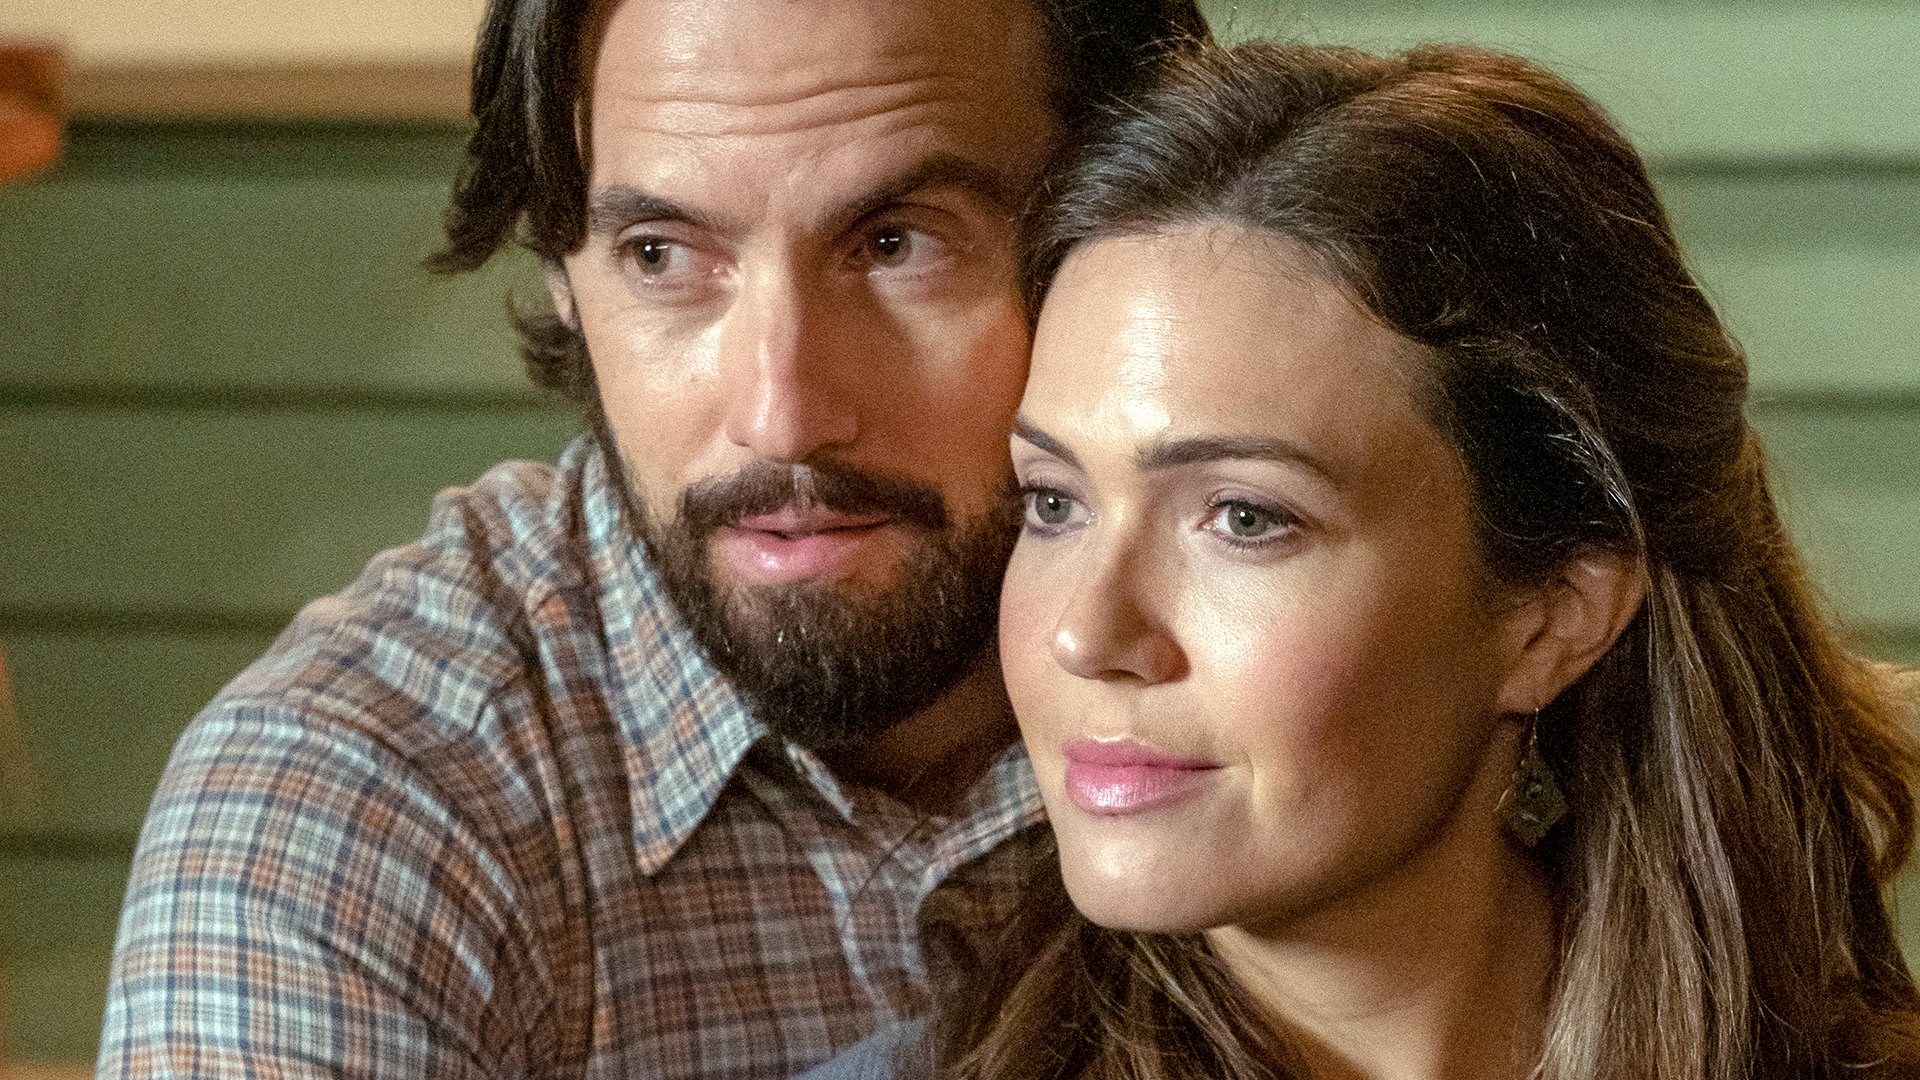 Milo Ventimiglia as Jack and Mandy Moore as Rebecca on 'This Is Us' Season 4 Episode 13